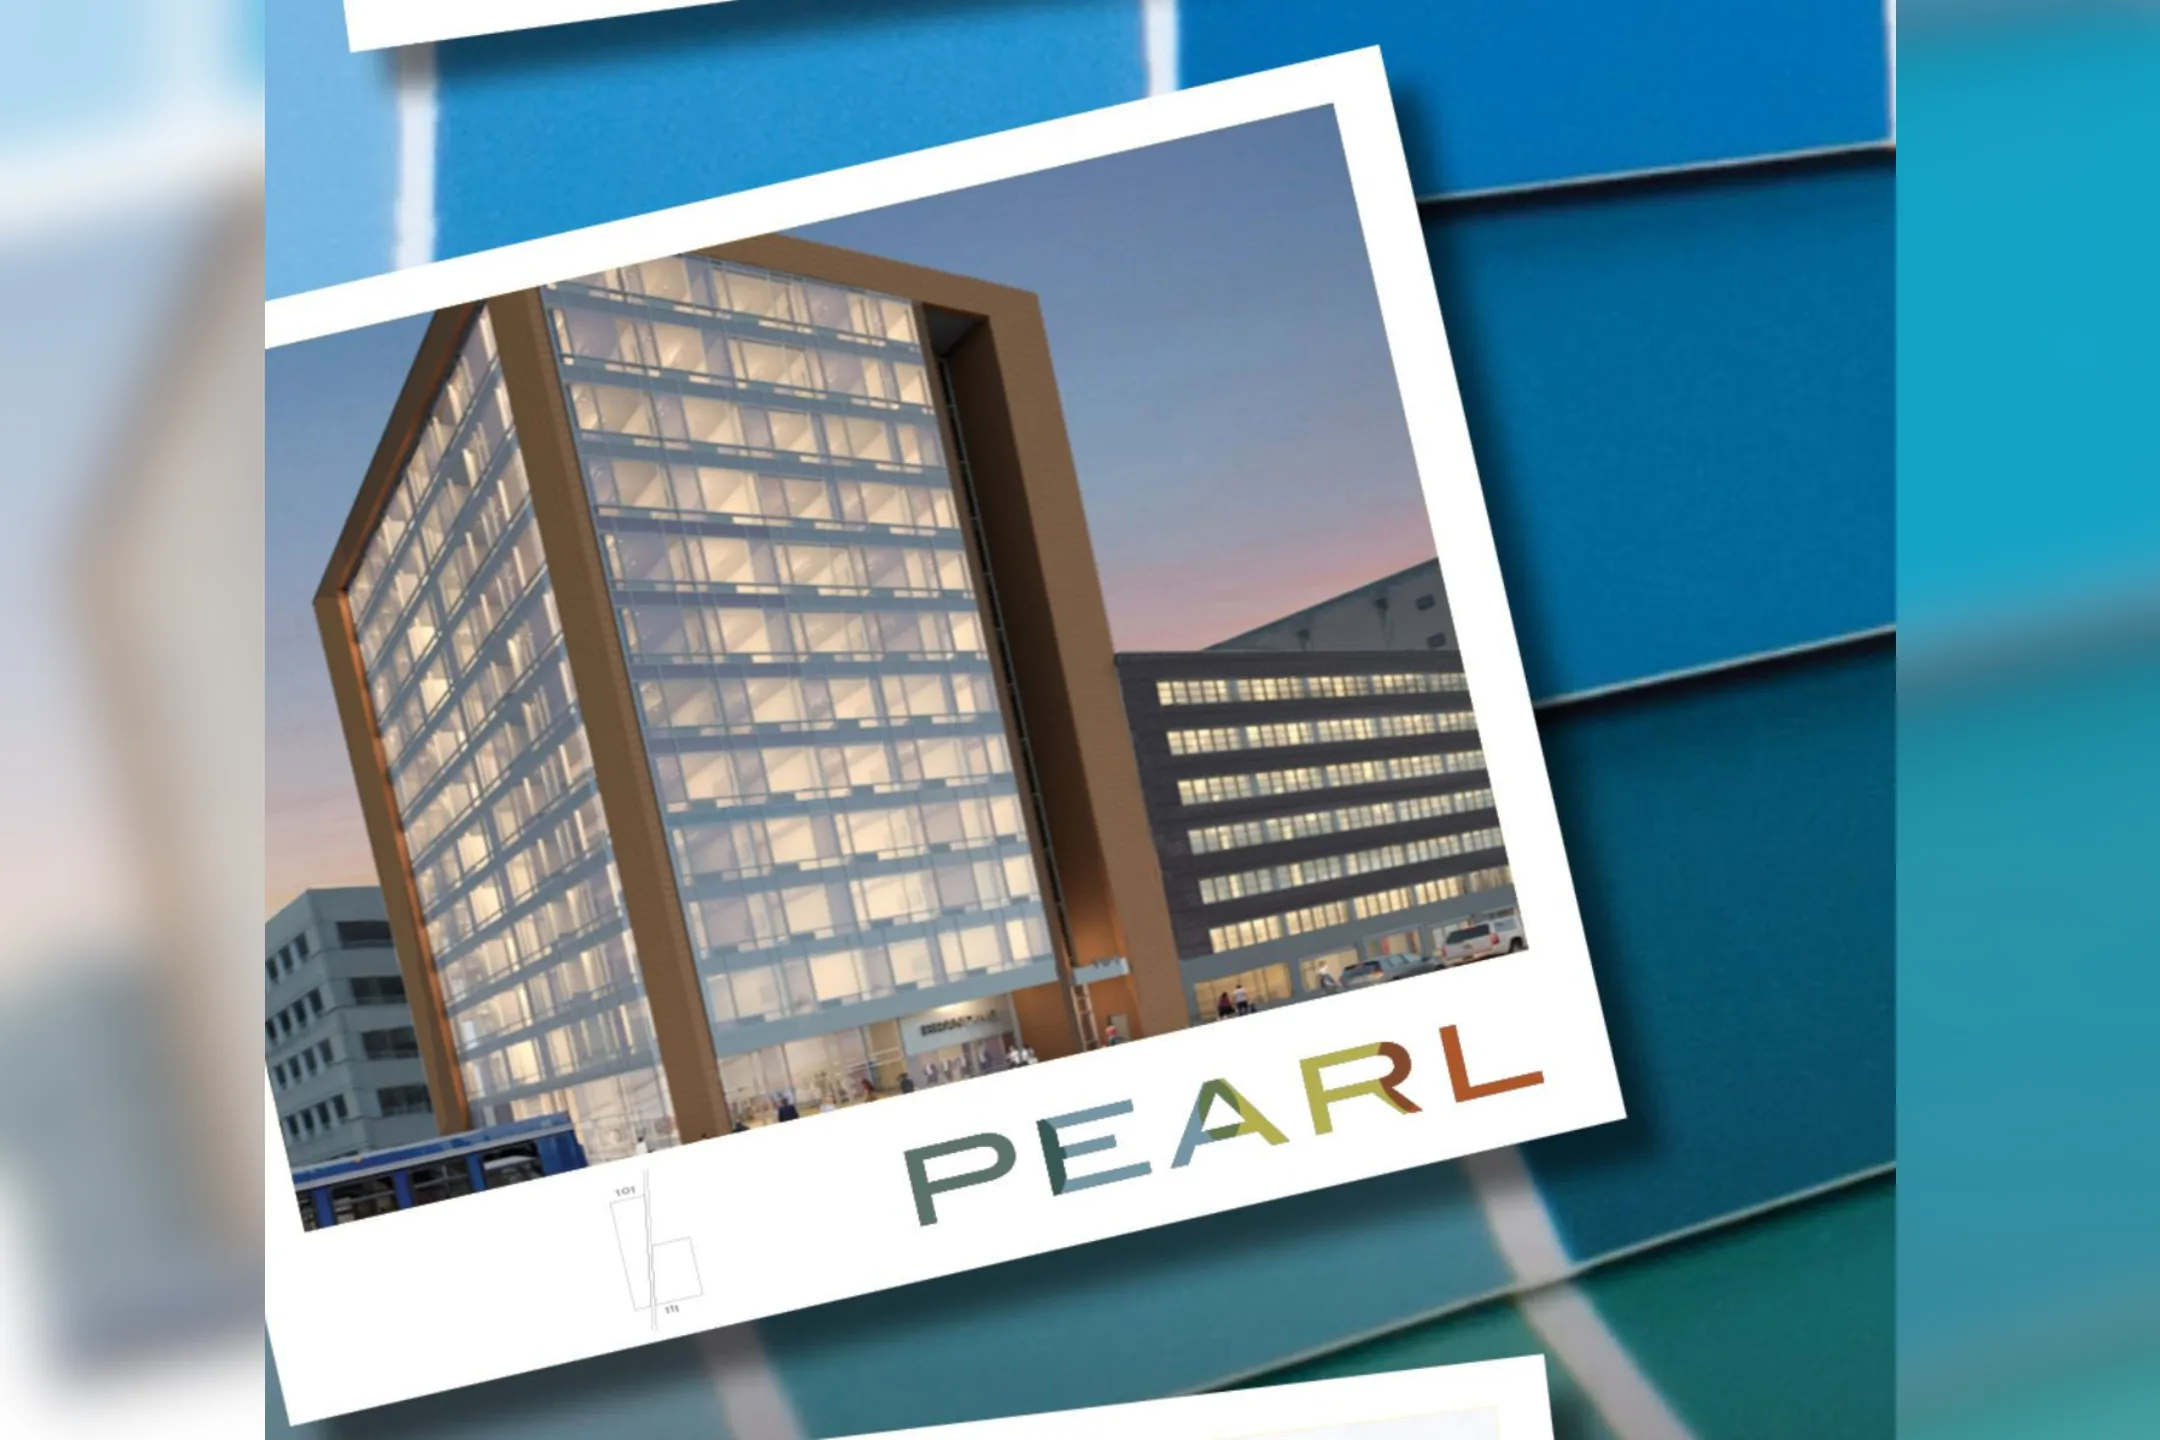 Spectra Pearl Apartments - Hartford, CT